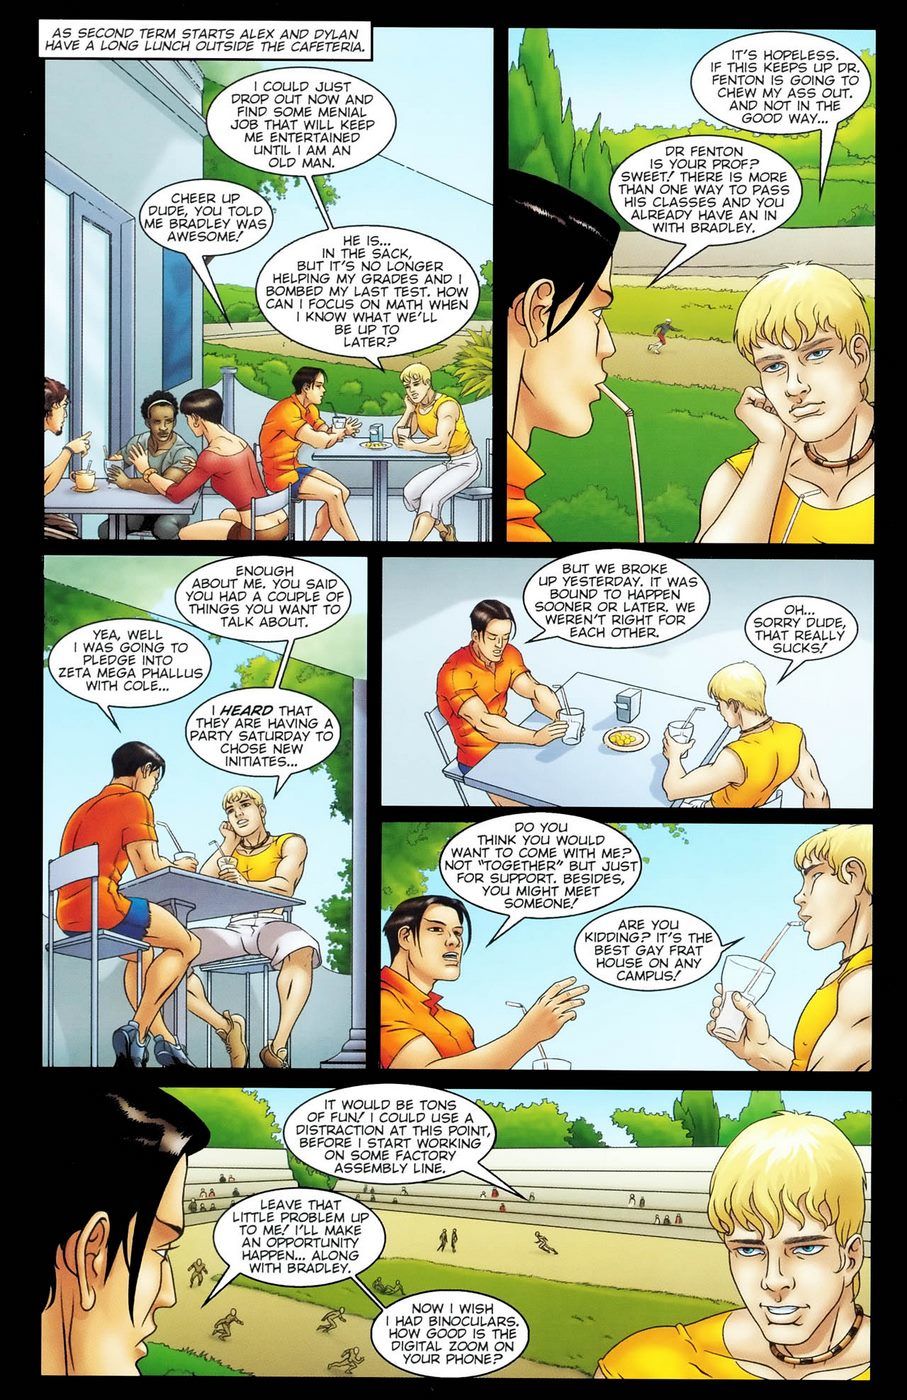 Gay-The Initiation Higher sex education page 1